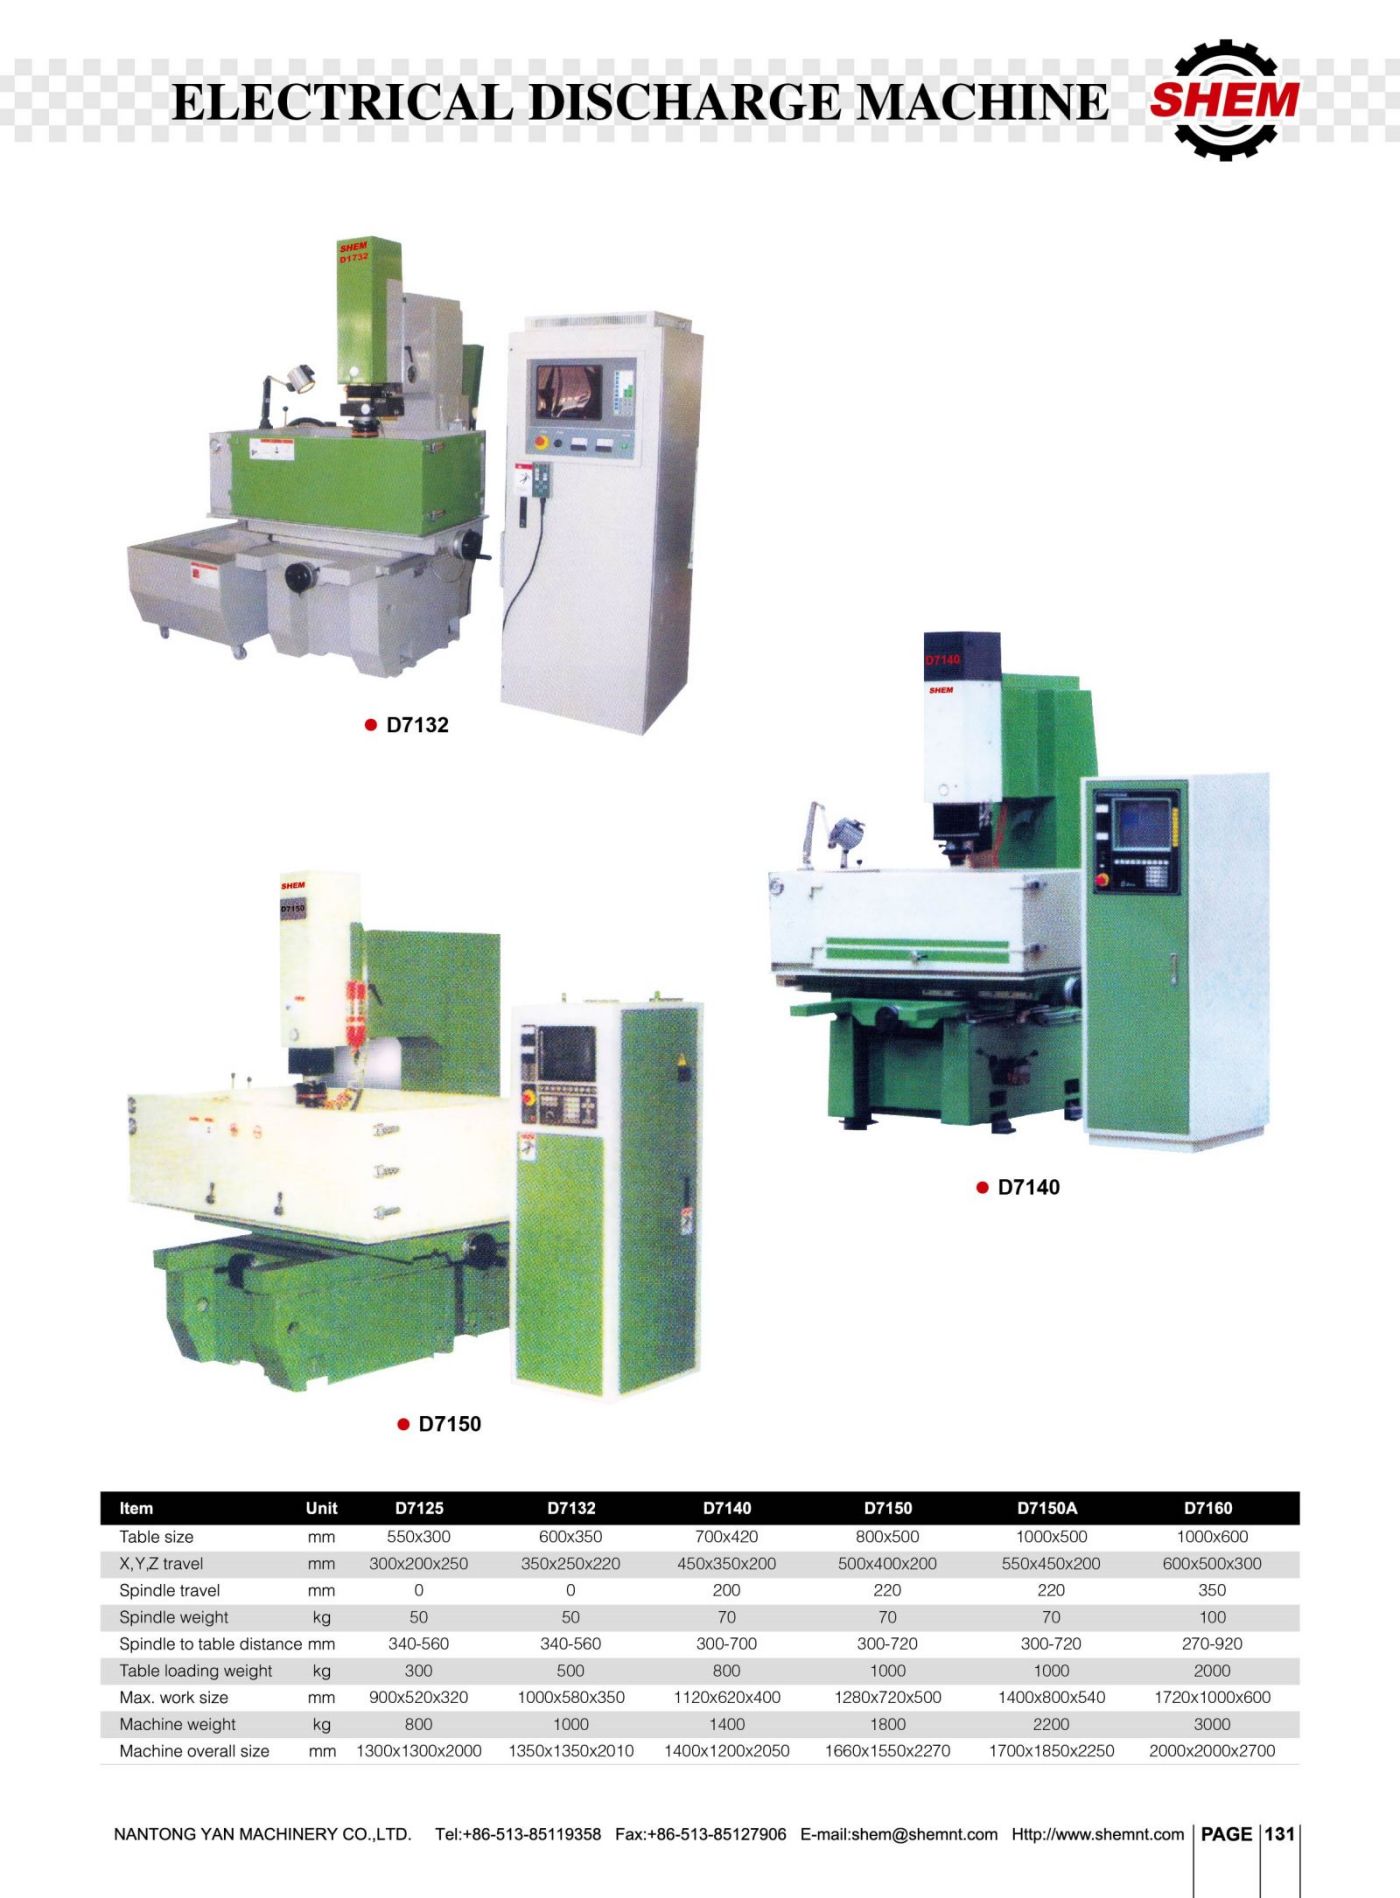 P131 ELECTRICAL DISCHARGE MACHINE